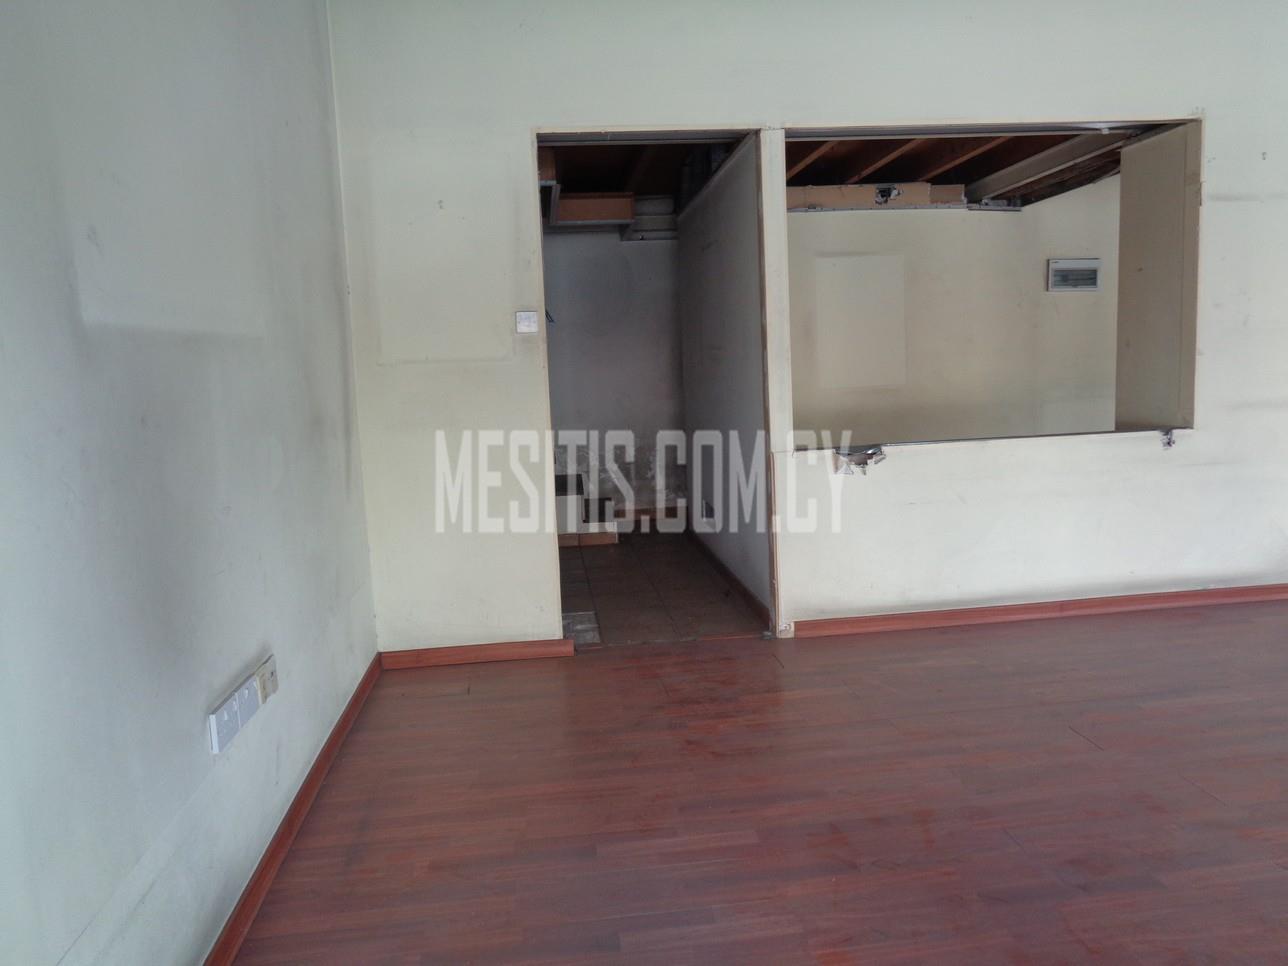 Shop Of About 80 Sq.M. For Rent In Nicosia City Centre #3845-0